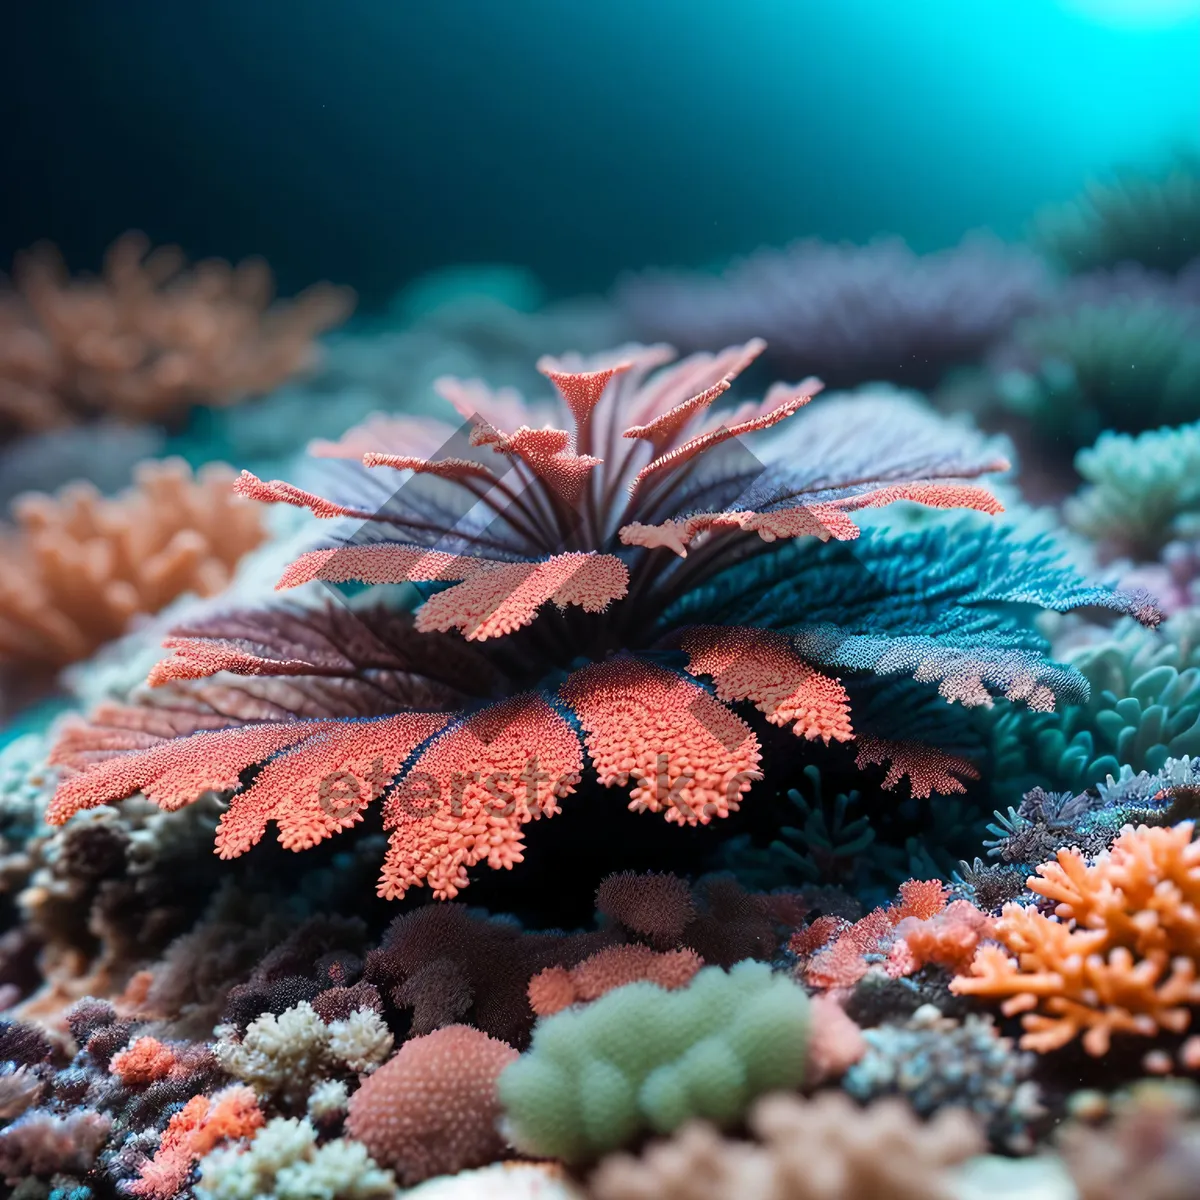 Picture of Colorful Reef Echinoderm in Tropical Waters.